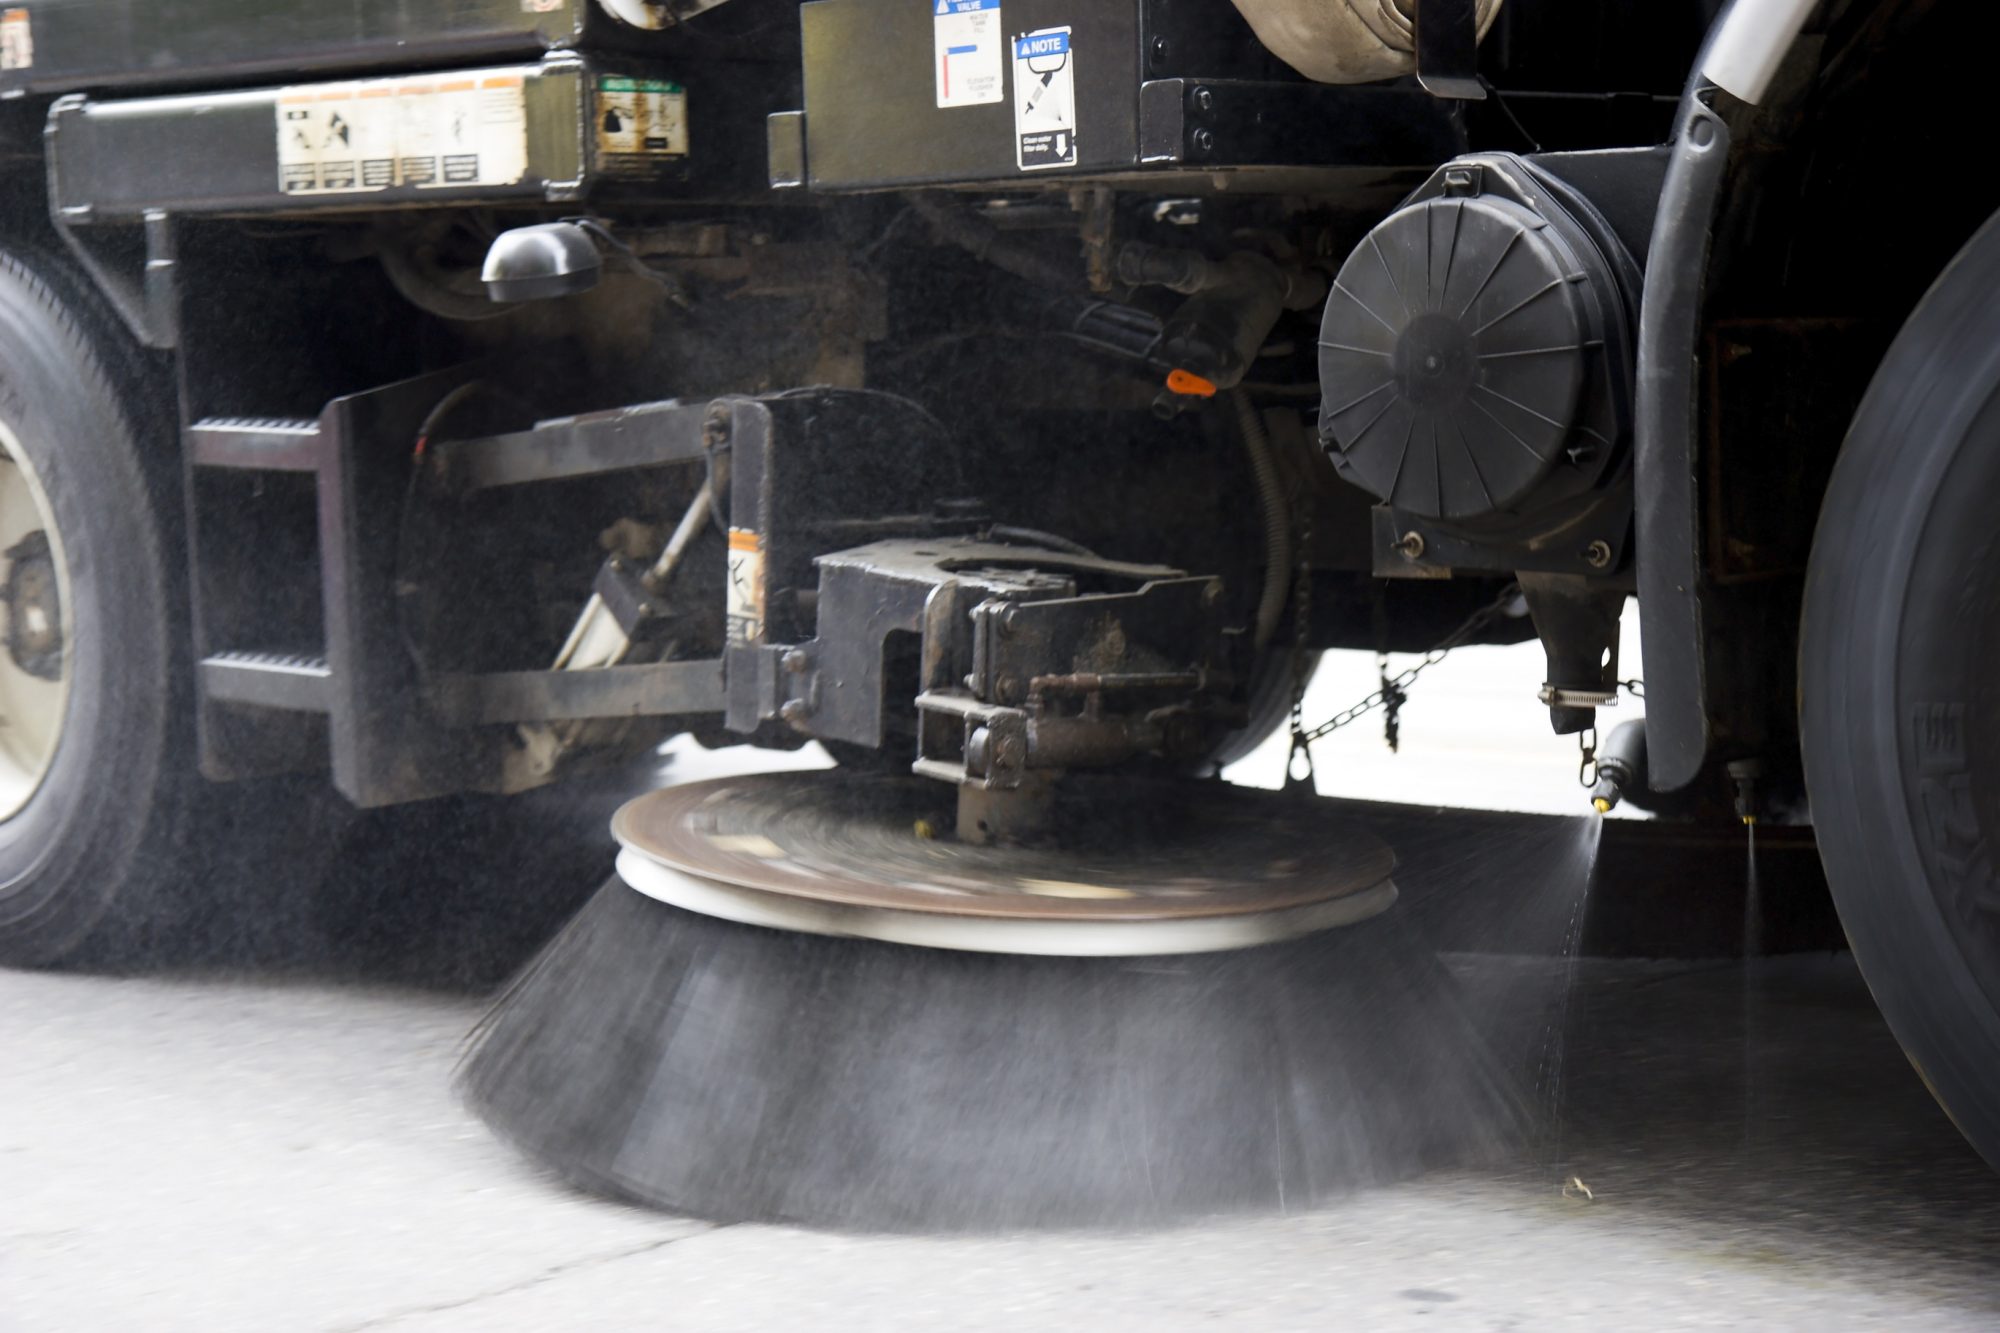 Sweeper truck, vehicle cleaning machine, clean urban road the streets